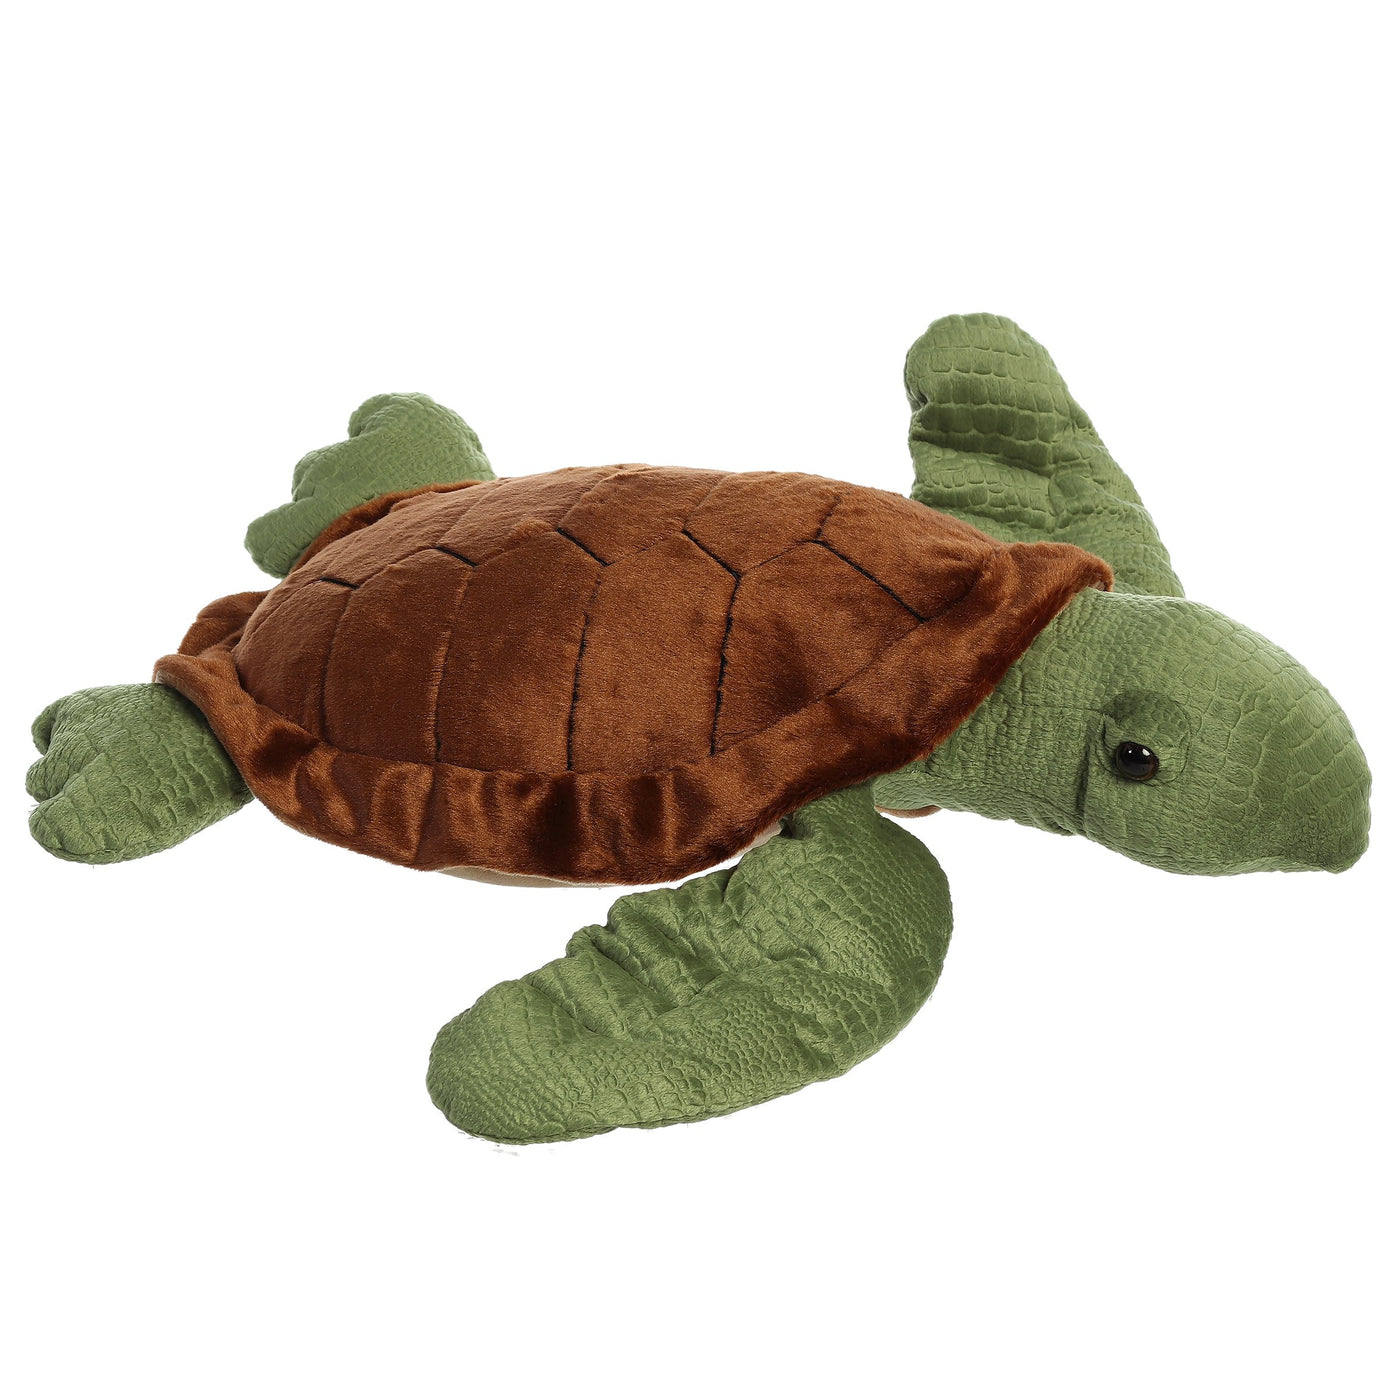 Aurora Super Flopsy 28" Toy-HOME/GIFTWARE-SEA TURTLE-Kevin's Fine Outdoor Gear & Apparel